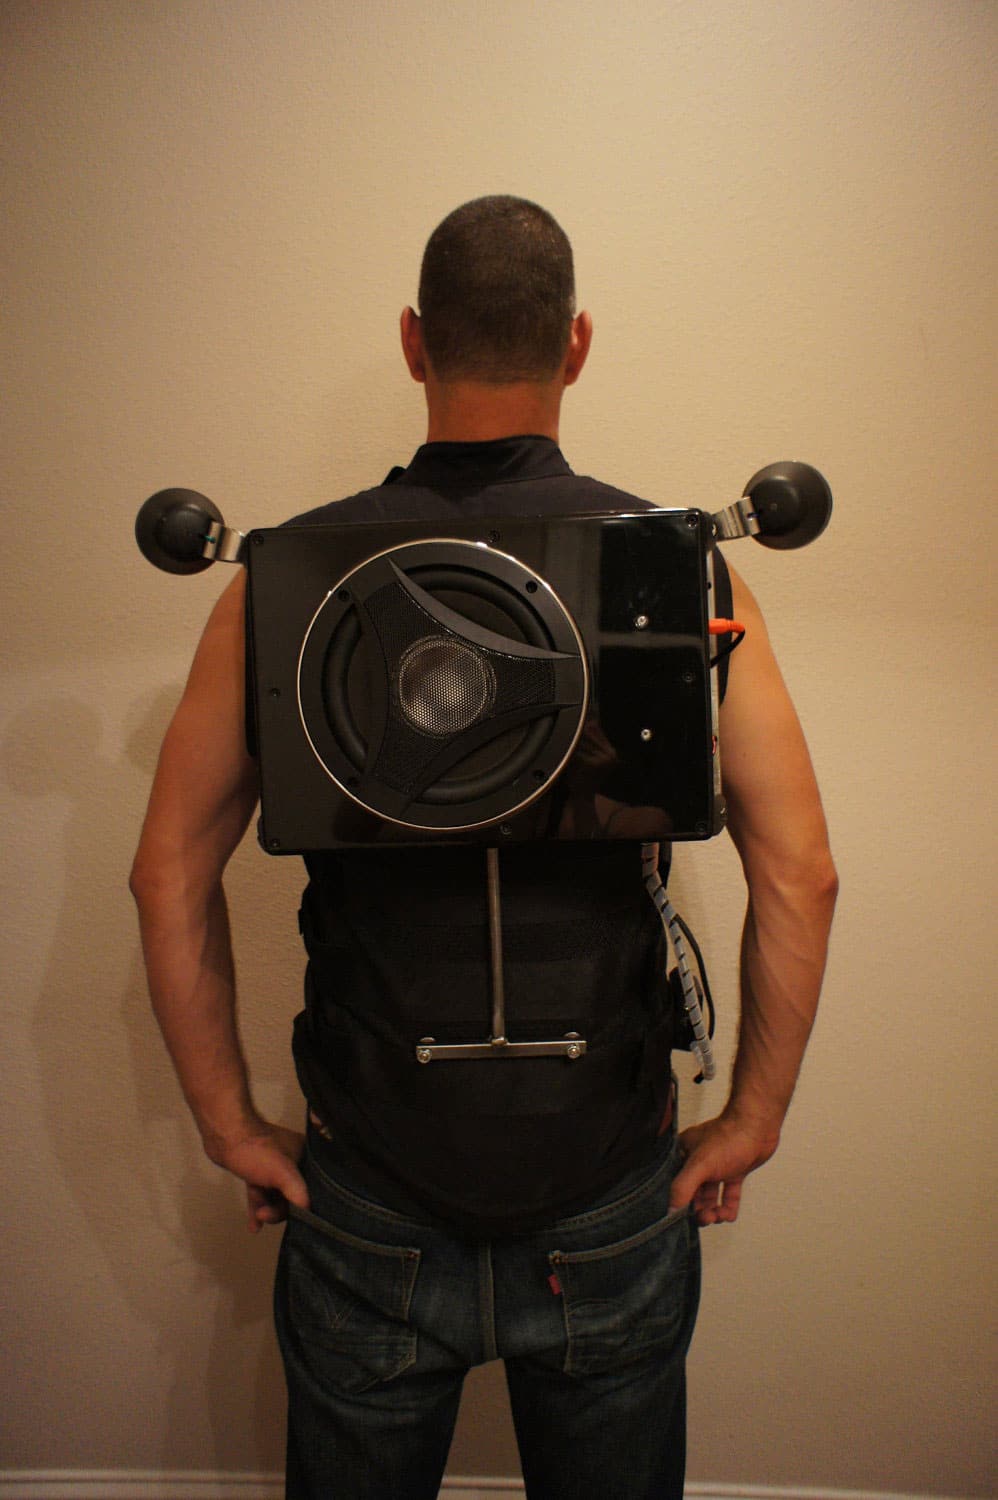 Wearable Boombox Backpack Packs A Divine Punch